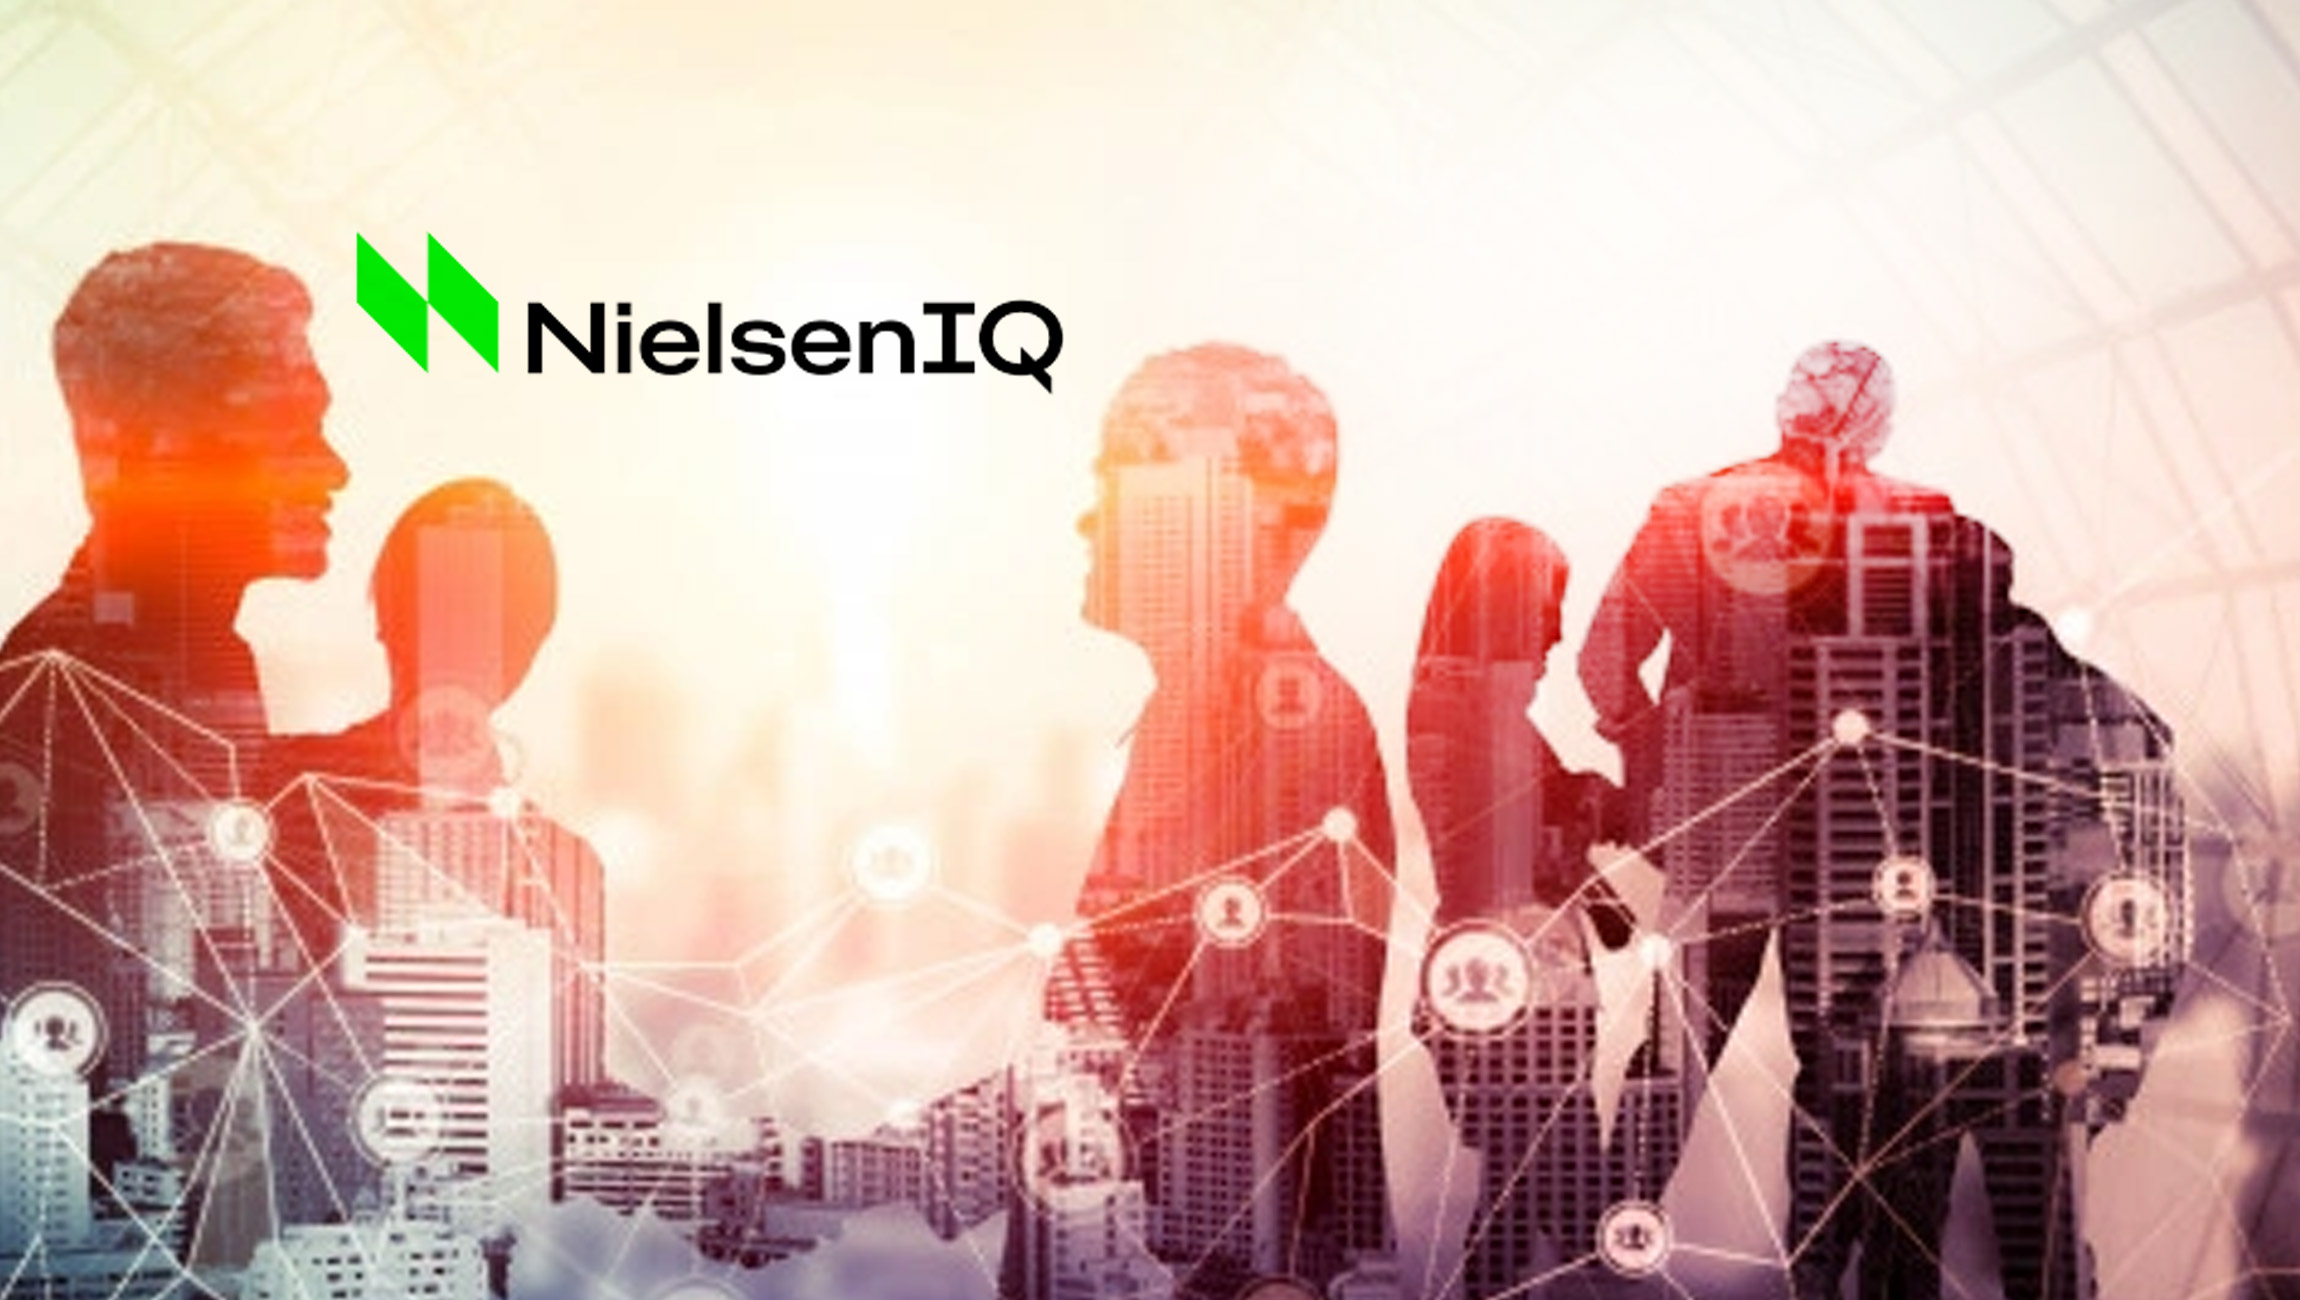 NielsenIQ Sets the Pace for the Omnichannel Measurement Revolution